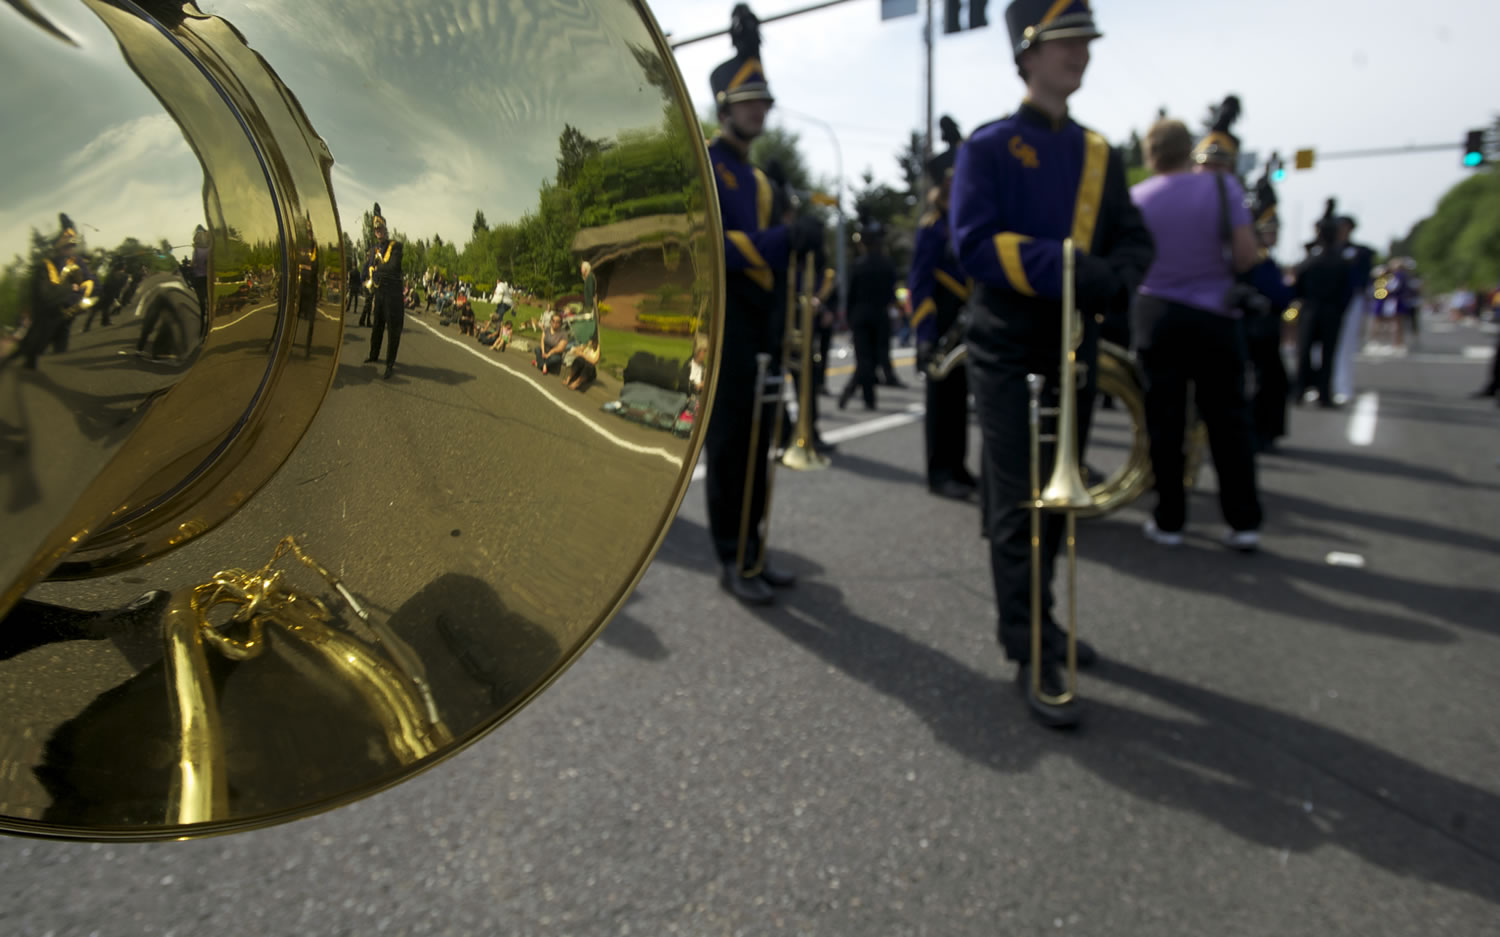 Members of Columbia River's band are reflected in sophomore Michael Hall's sousaphone before the start of the 48th annual Hazel Dell Parade of Bands in 2012.